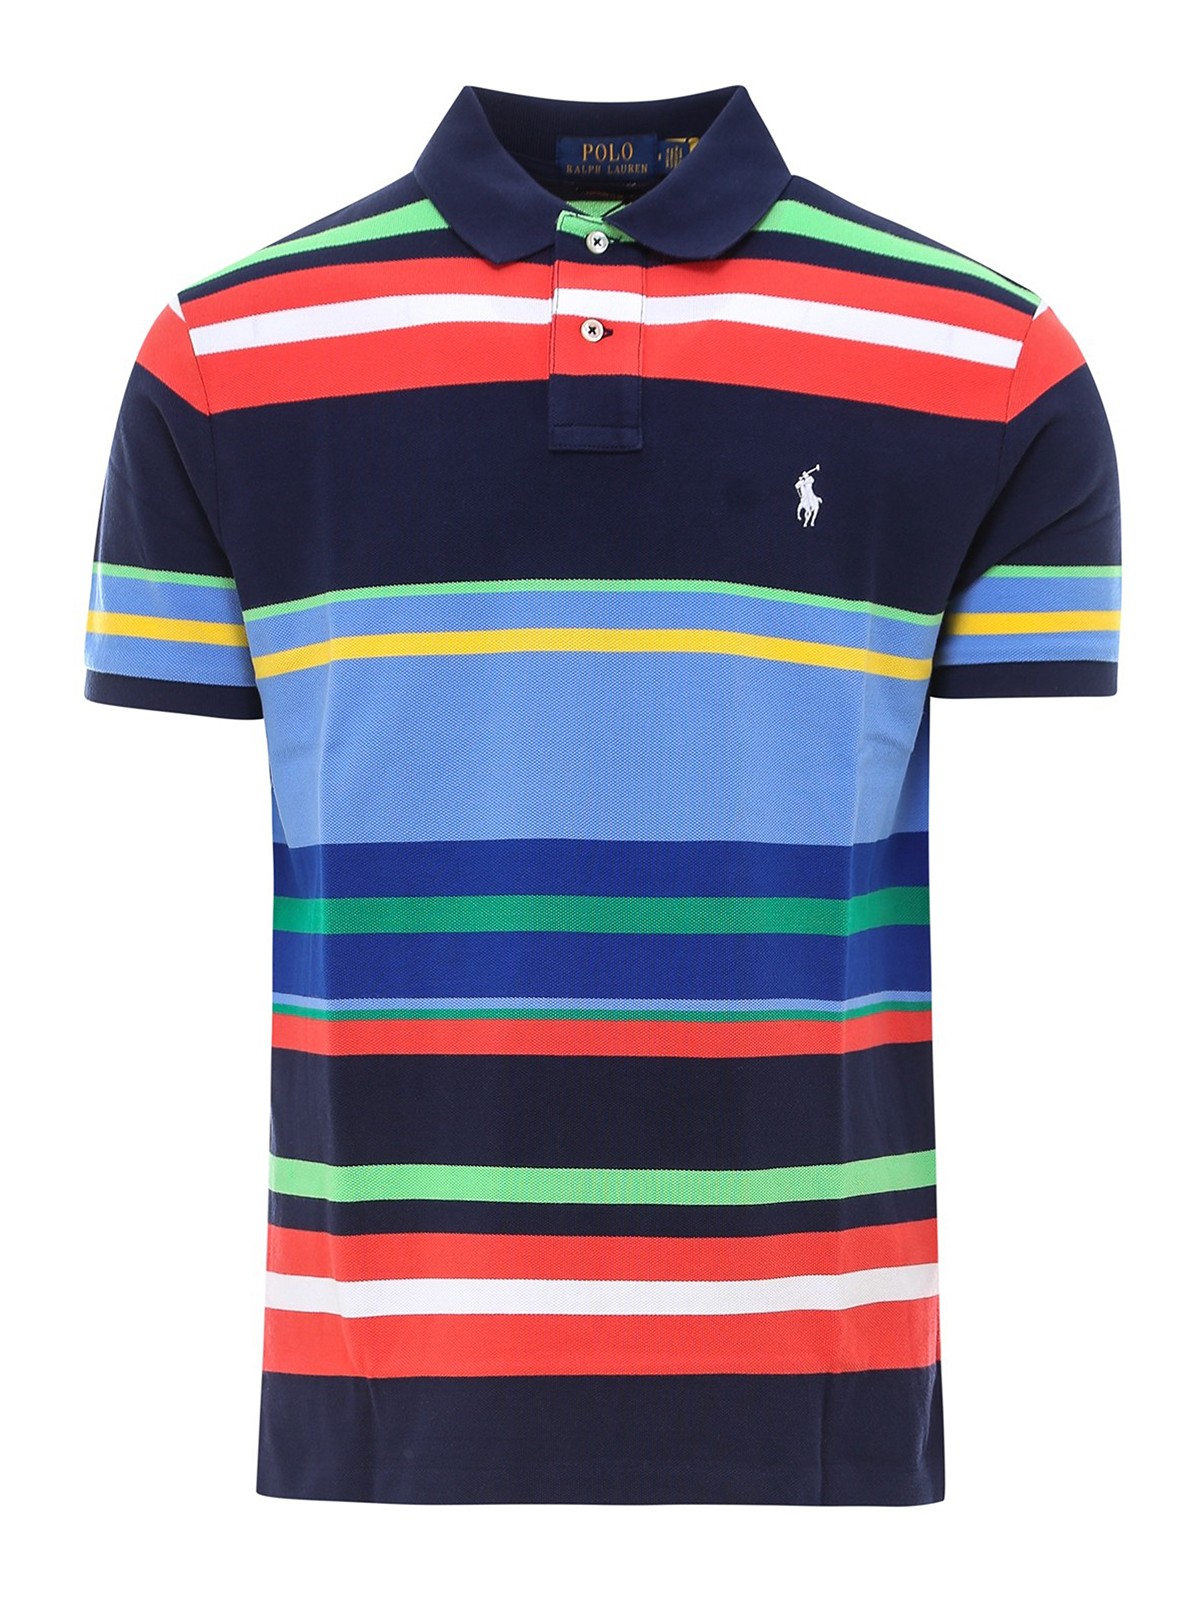 Stop by butterfly Partially Polos Polo Ralph Lauren - Polo - A Rayures - 710834875001 | iKRIX.com